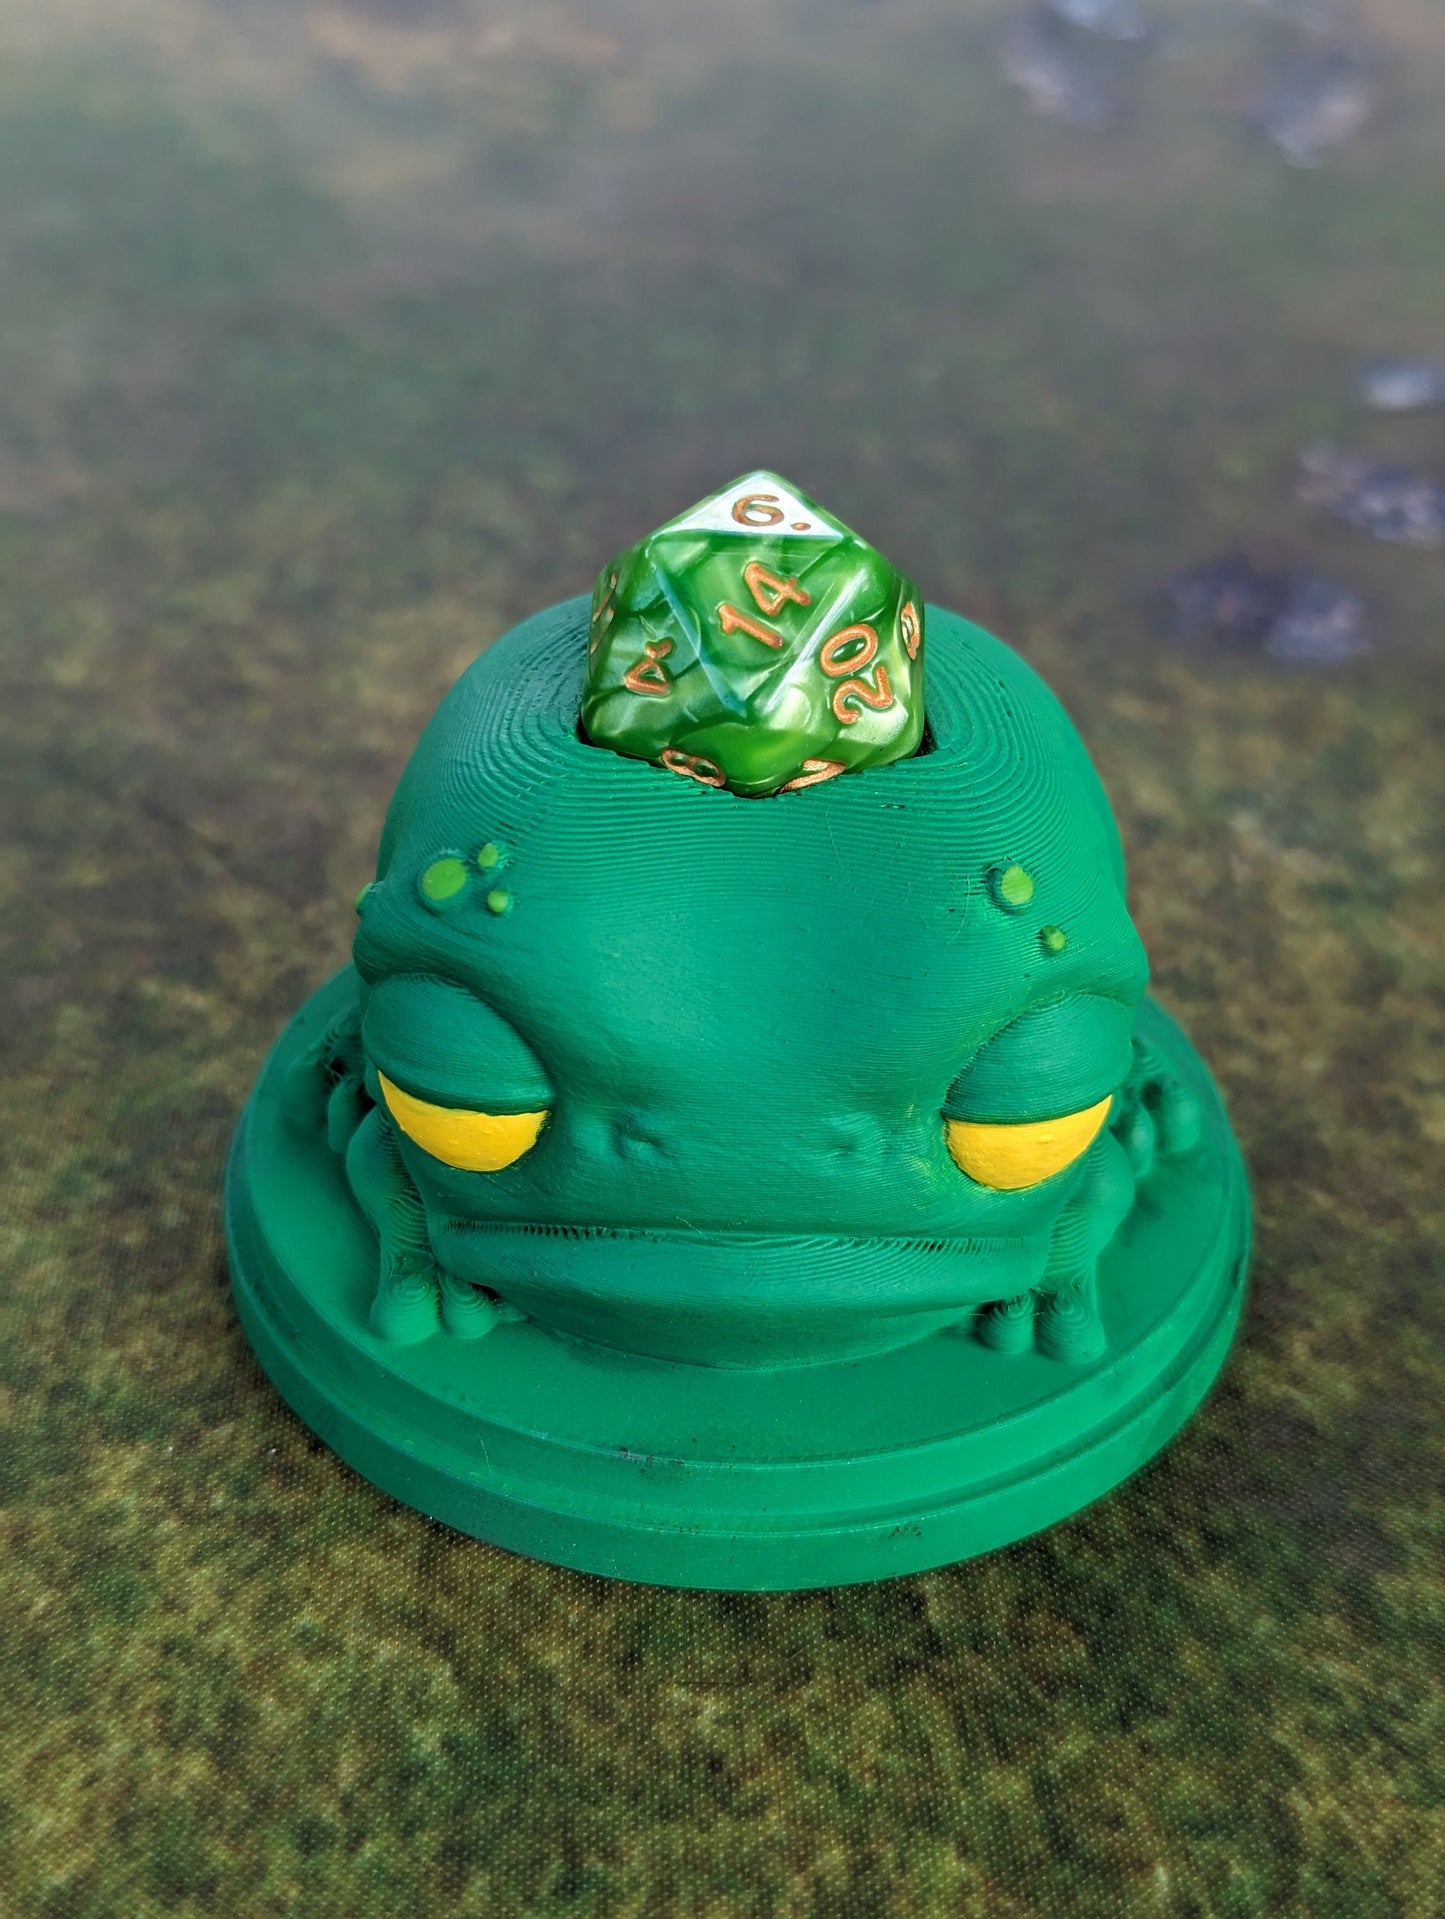 Rustifar Frog Toy 3D Printed Dice Guardian - Dice Jail | RPG Dice Vault | D20 Box | Player Unique Gift - Whimsical Dice Holder!